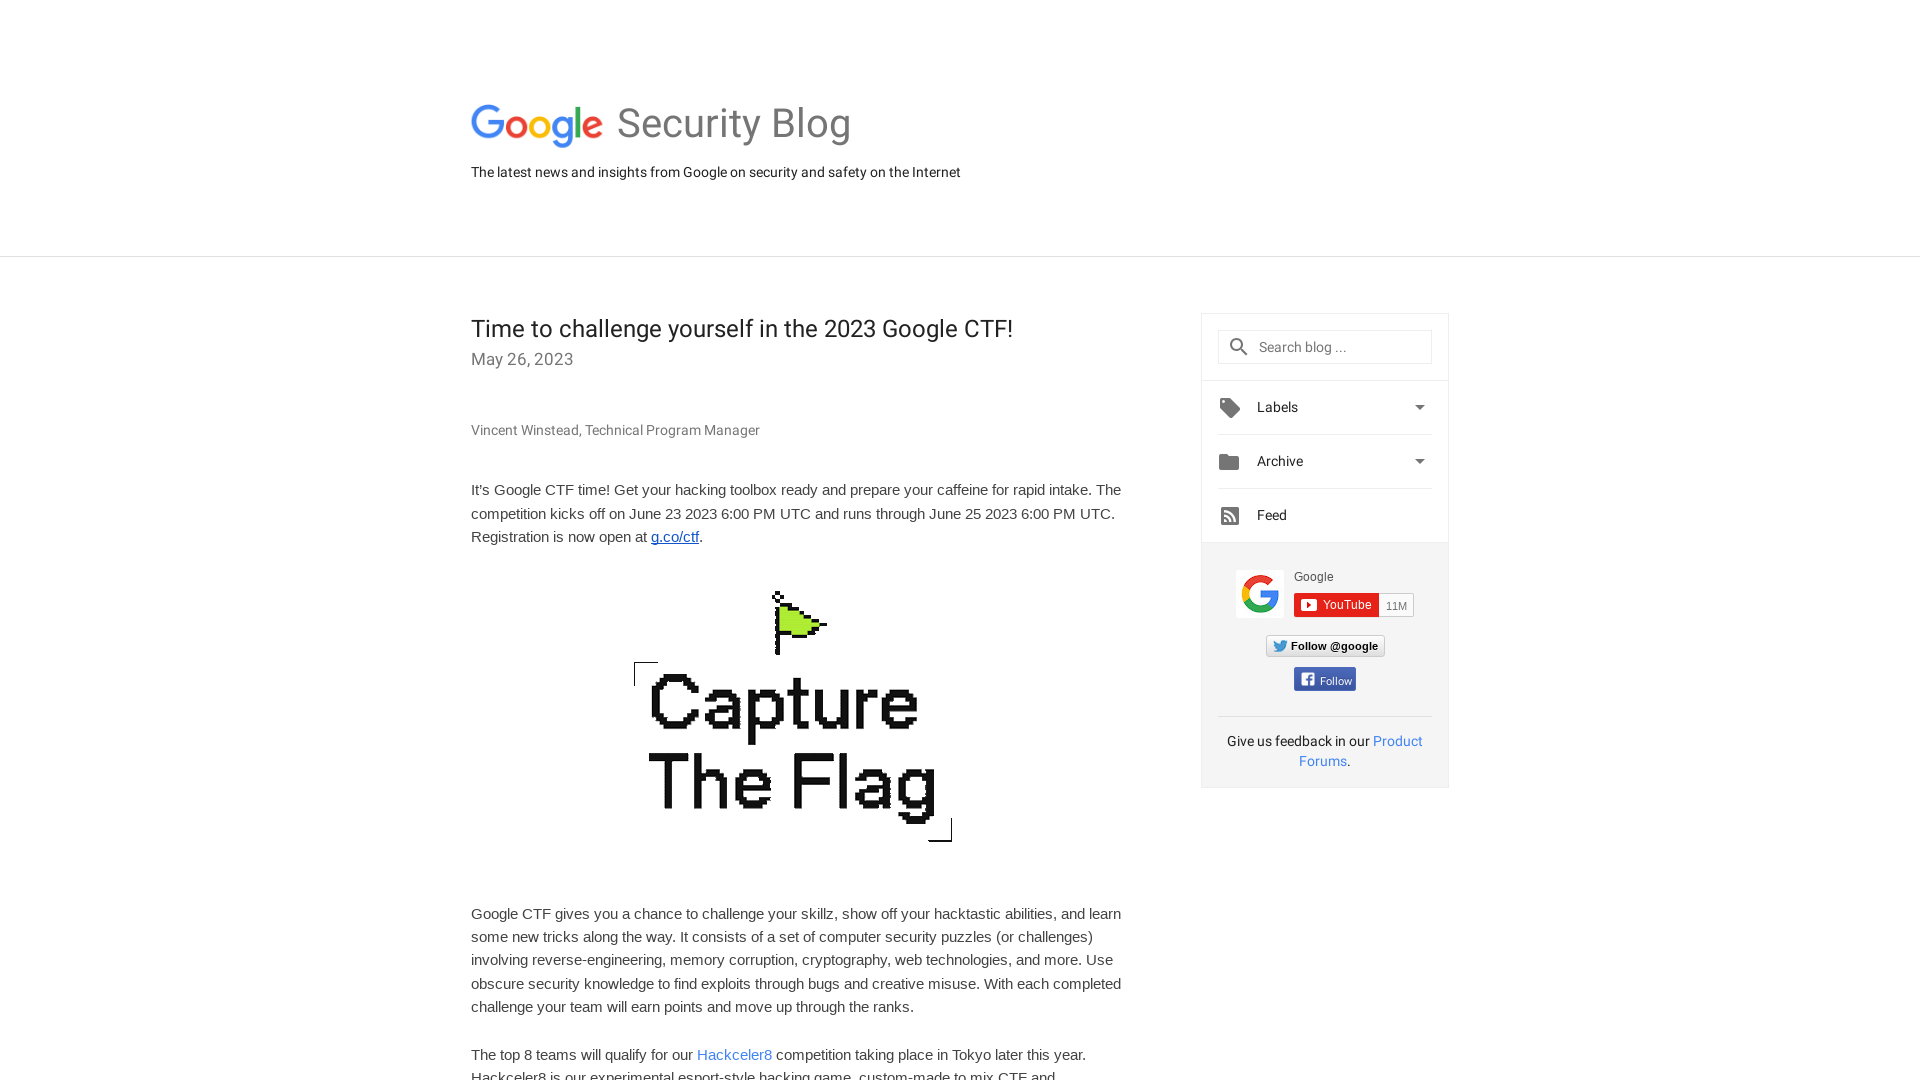 Google Online Security Blog: Time to challenge yourself in the 2023 Google CTF!